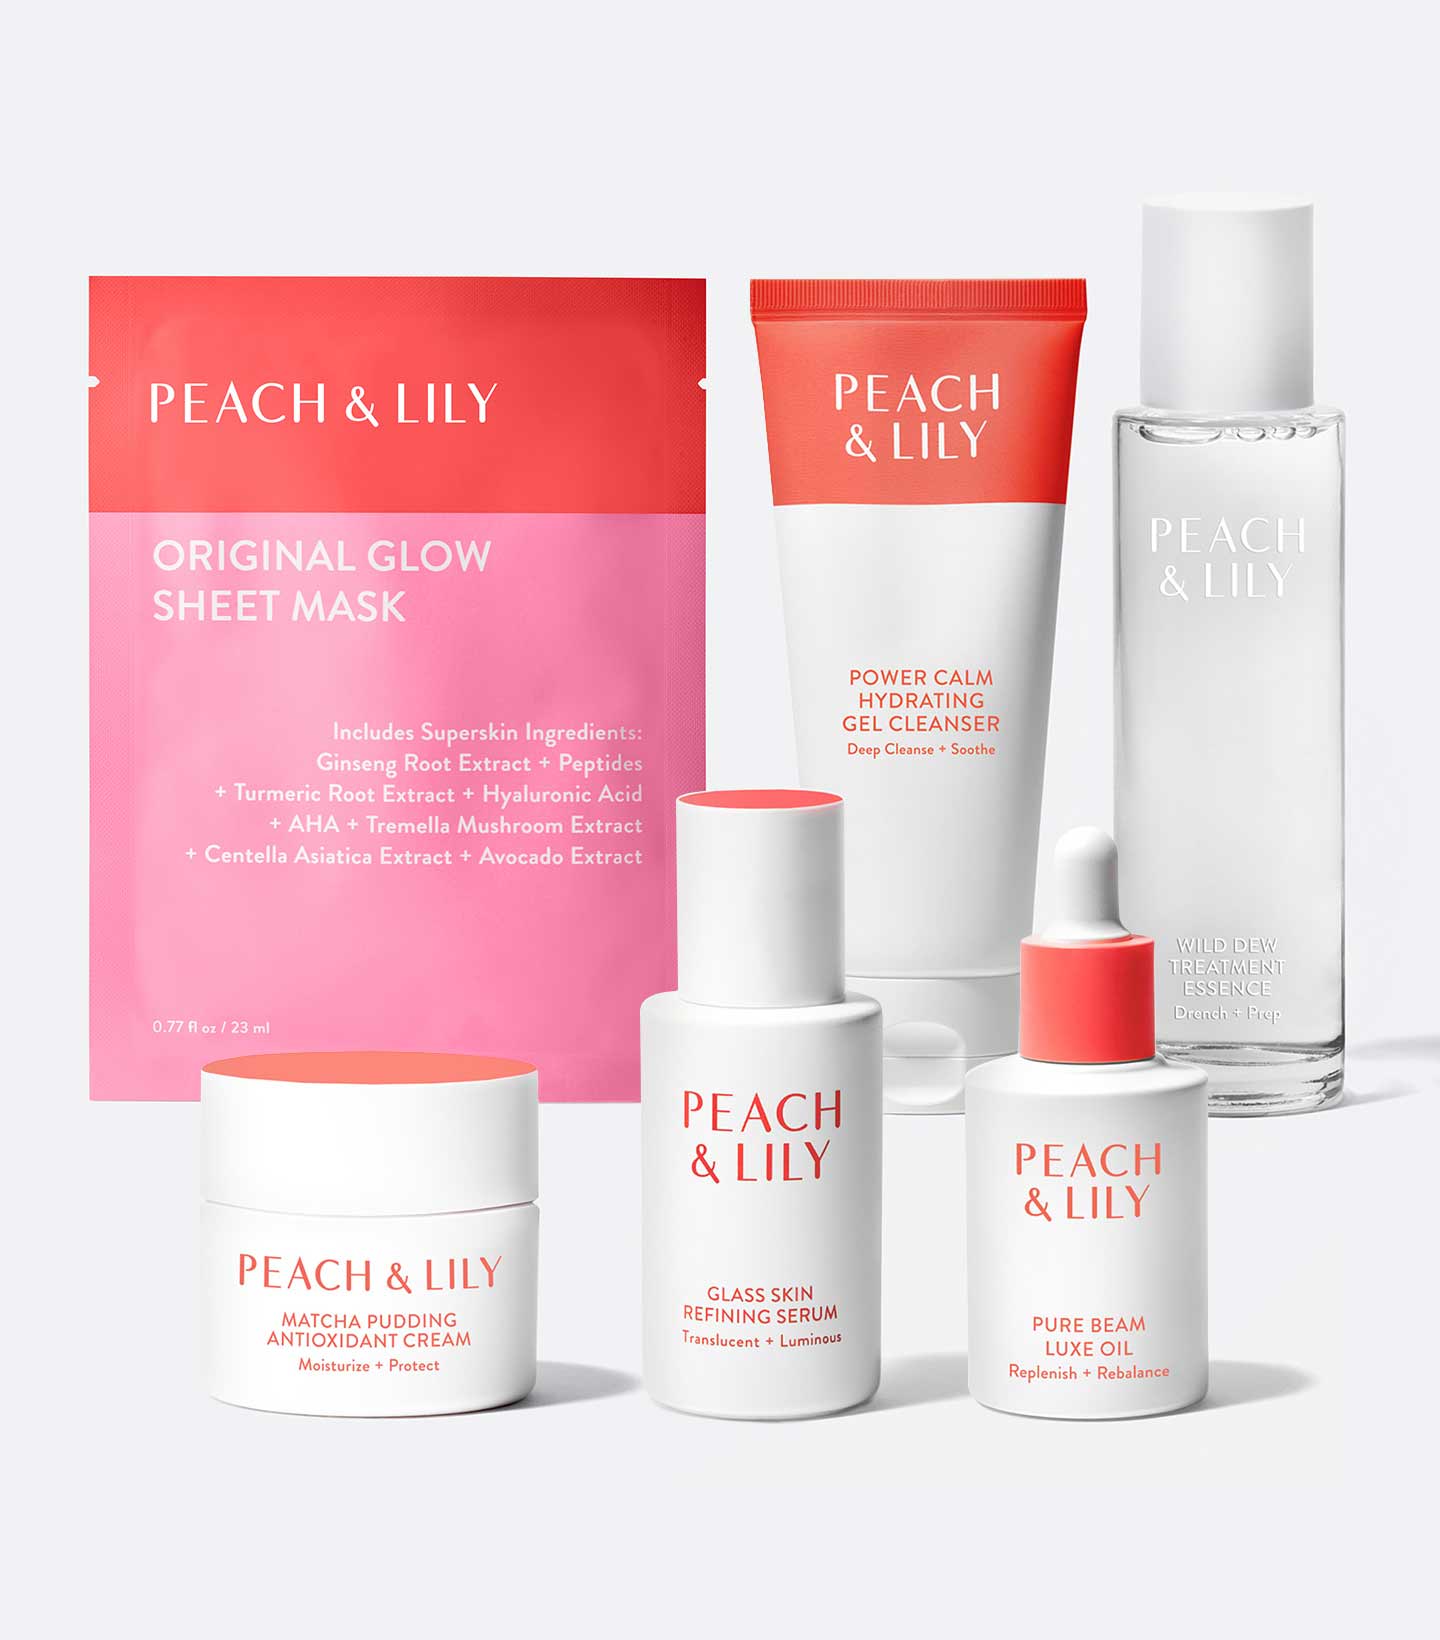 HOW TO GET GLASS SKIN WITH THE PEACH & LILY GLASS SKIN REFINING